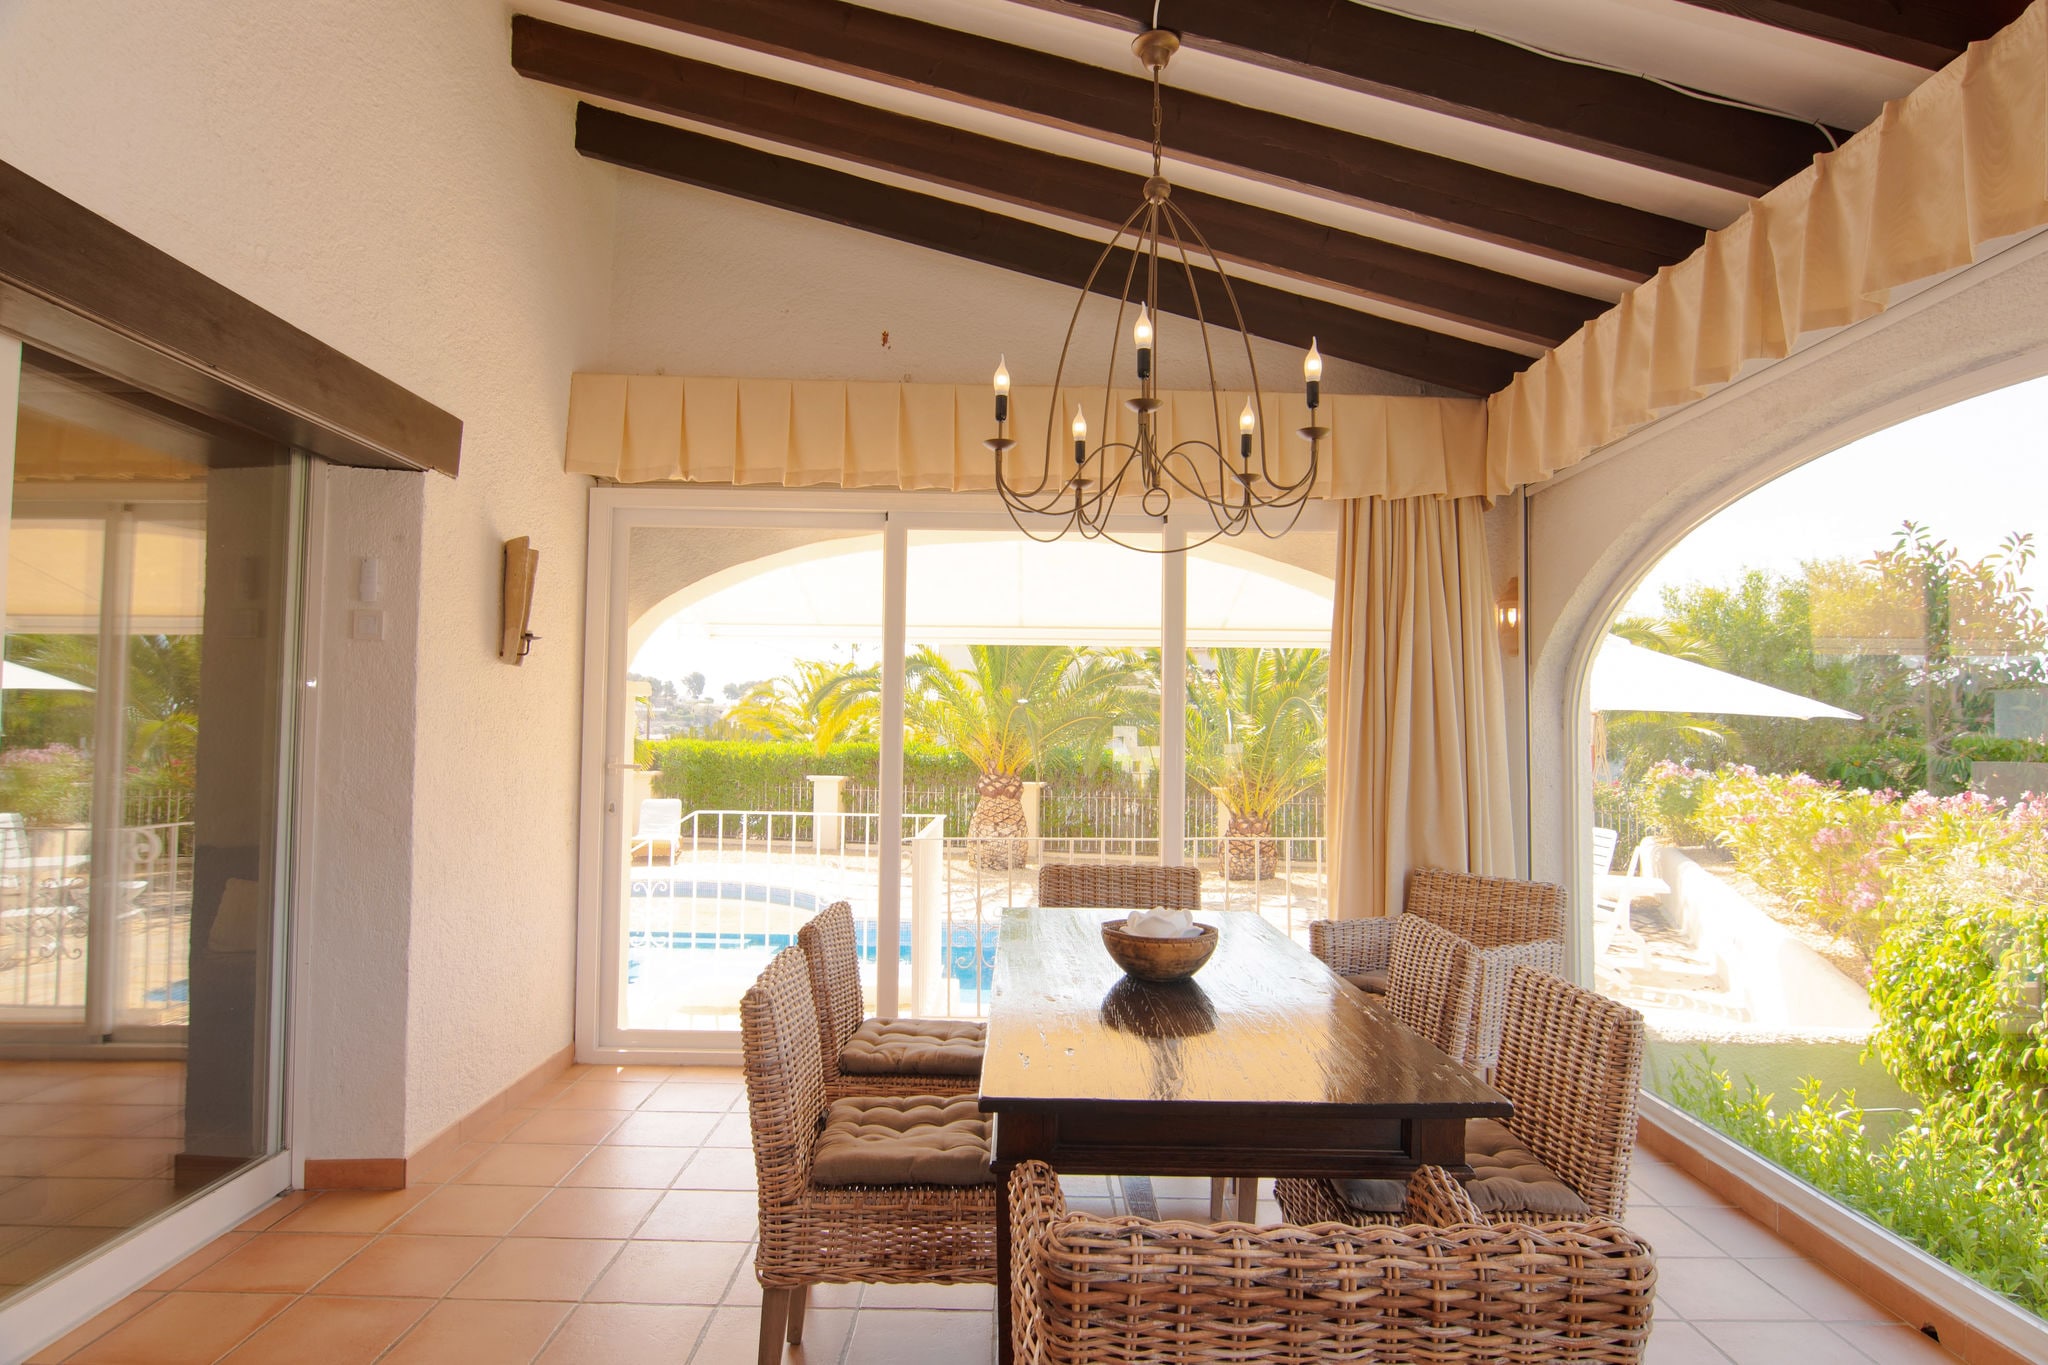 Fantastic Villa for 6 people, terraces with great views, private pool